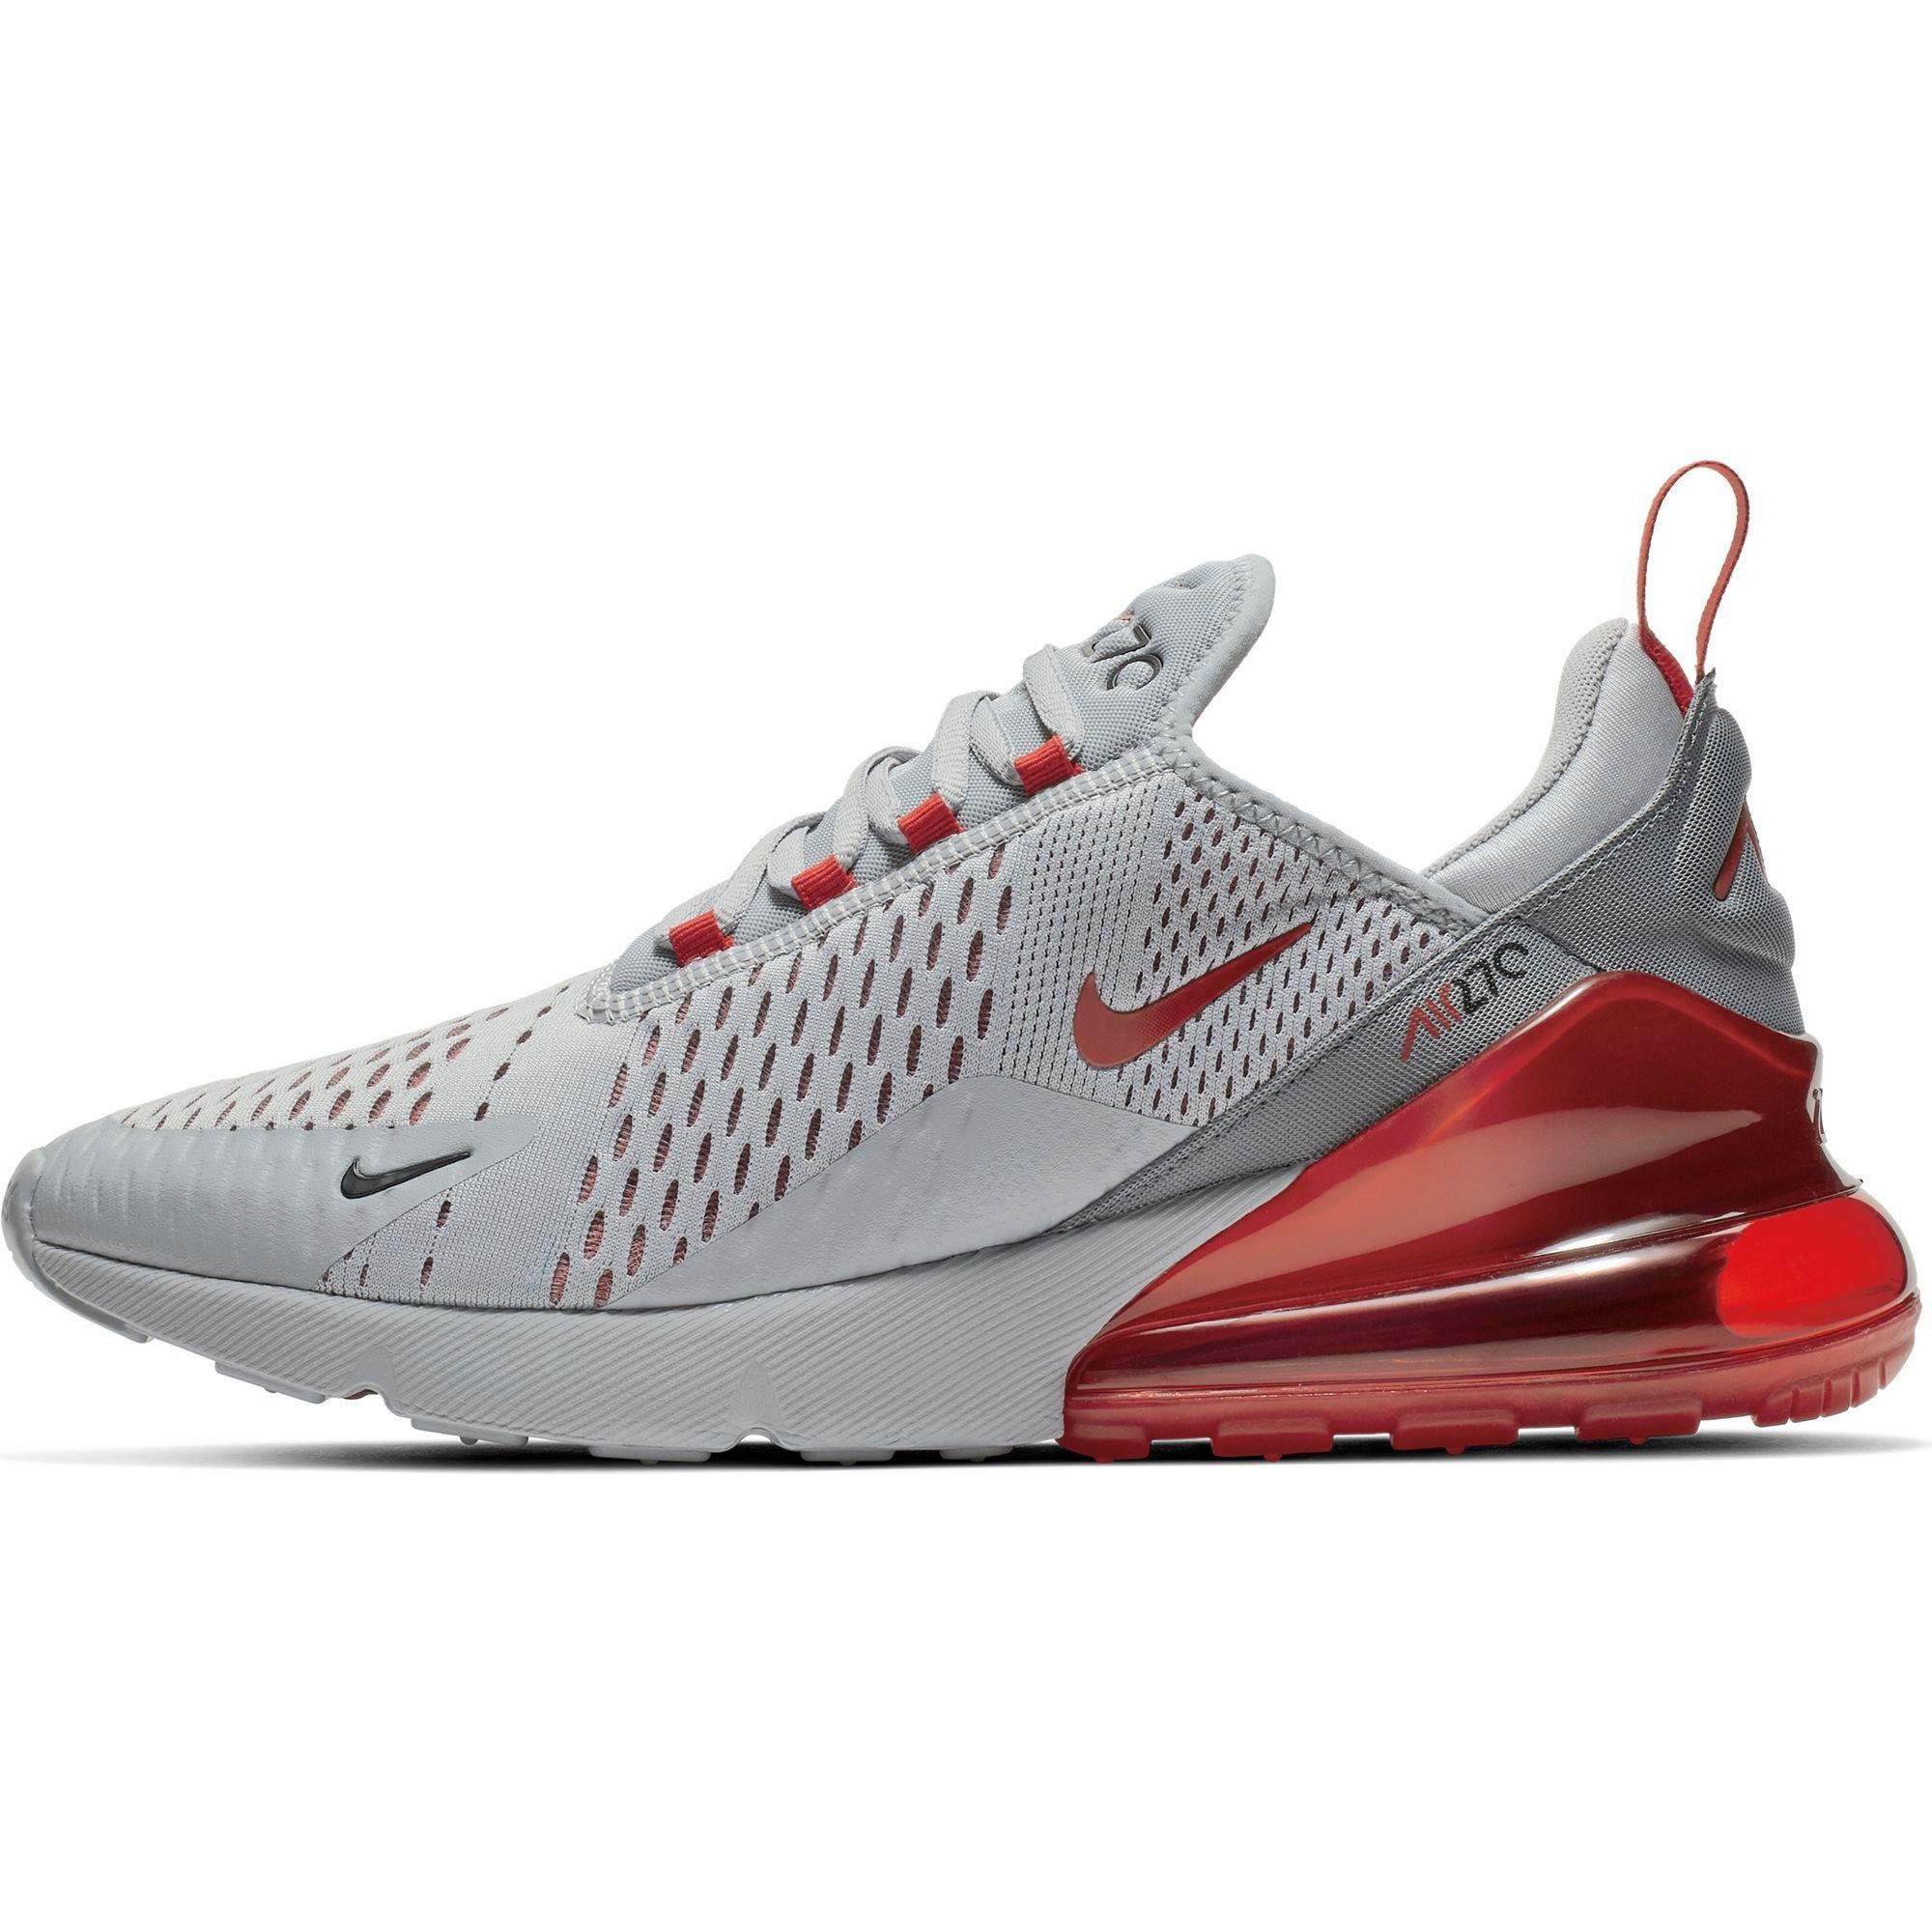 grey and red 270s